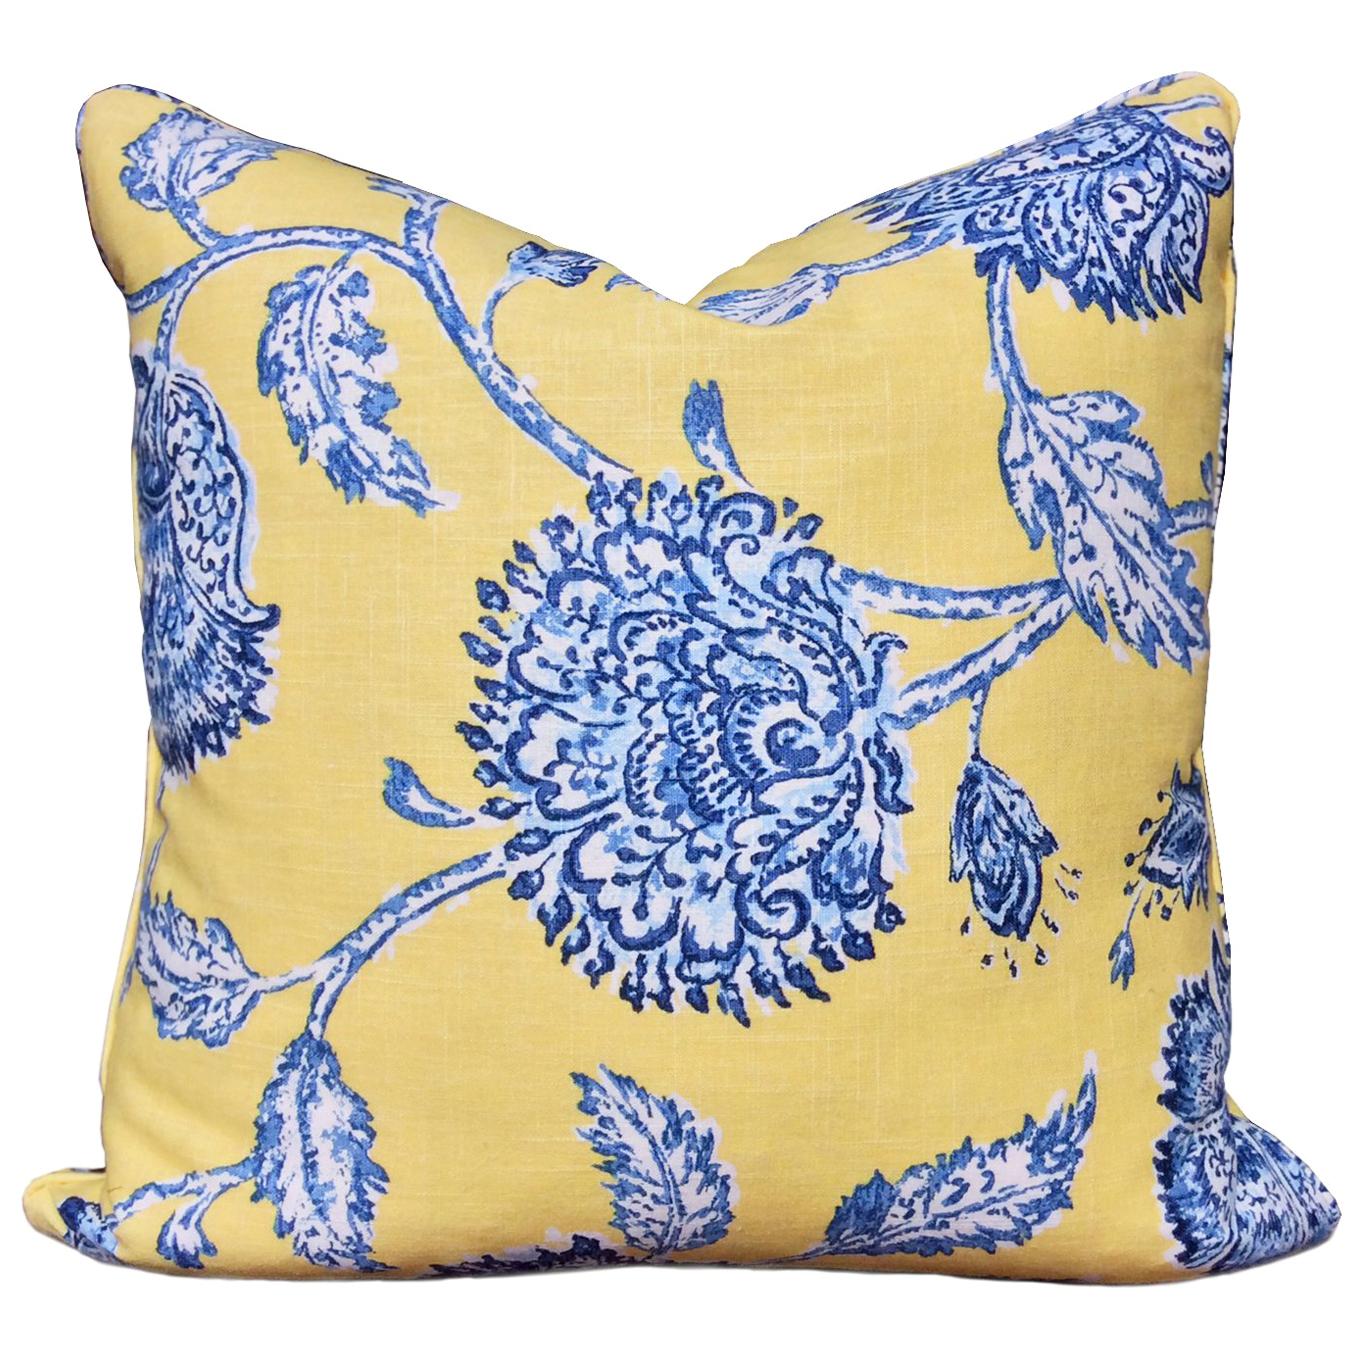 Custom Made Square Yellow and Blue Floral Pillow